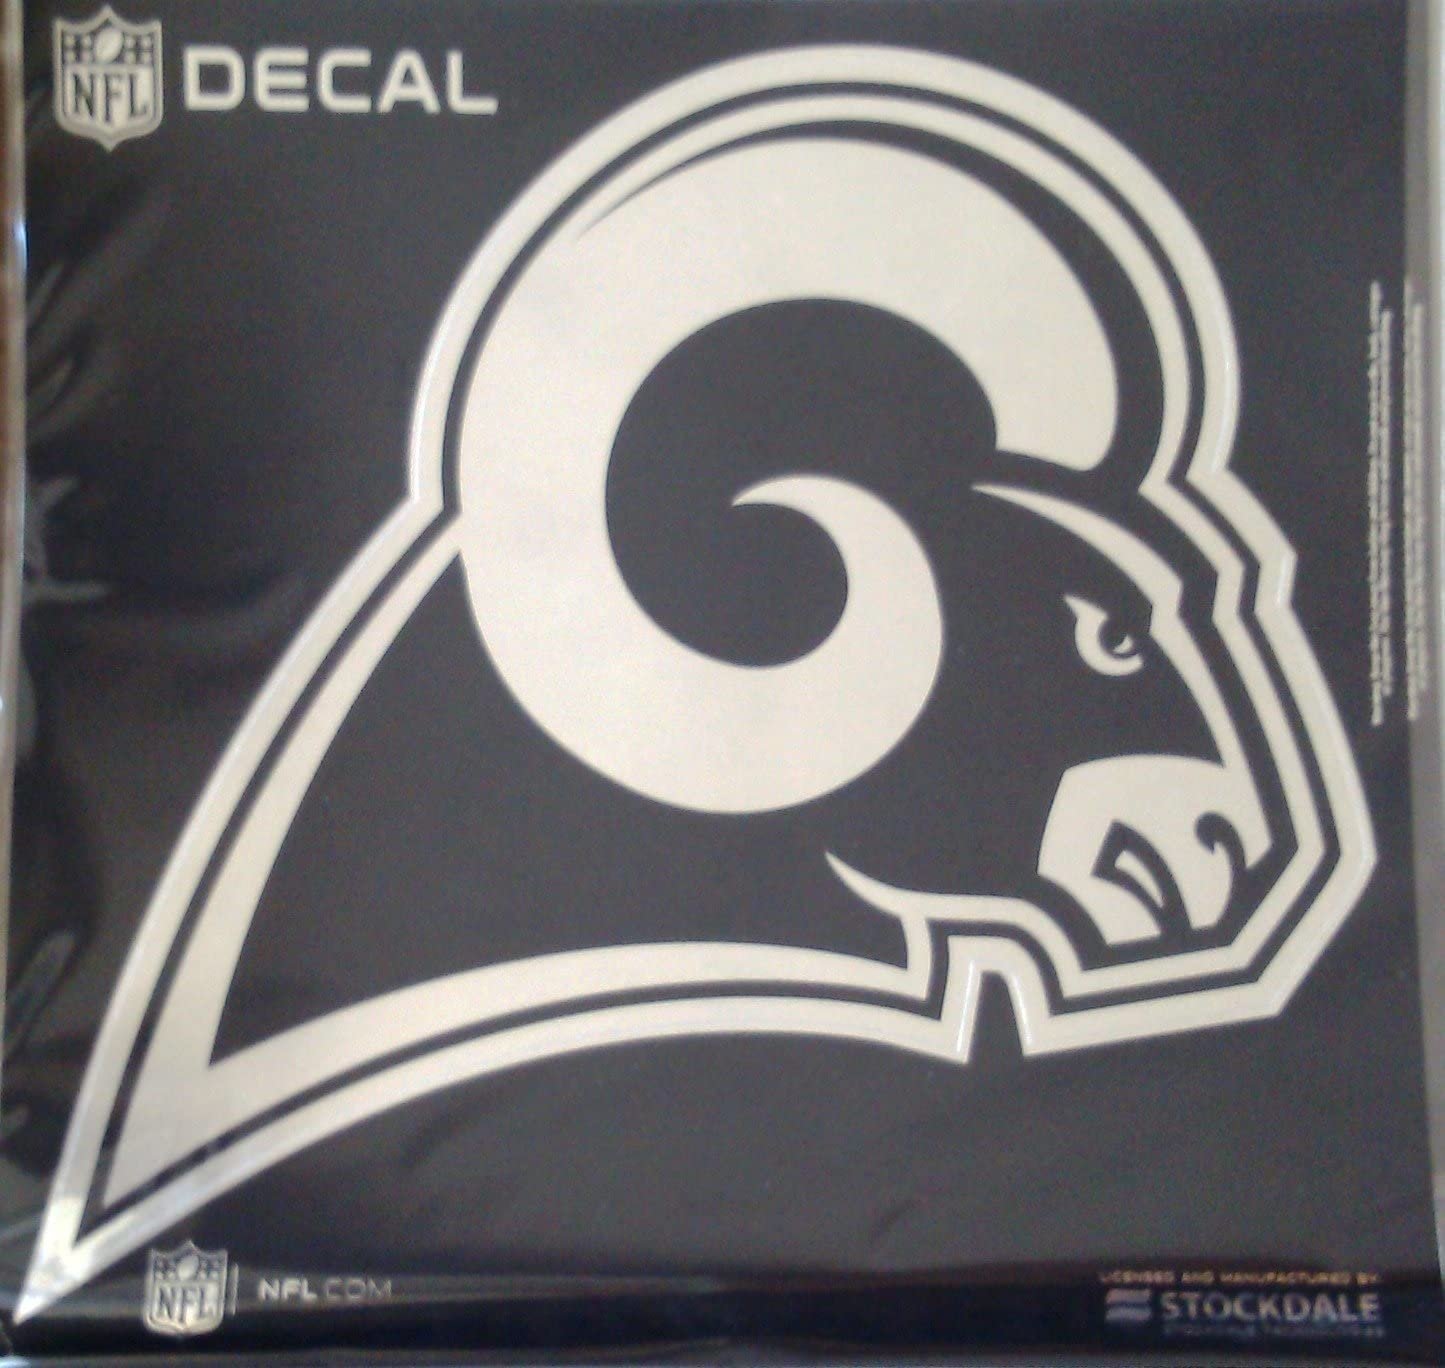 Los Angeles Rams 6 Inch Decal Sticker, Metallic Chrome Shimmer Design